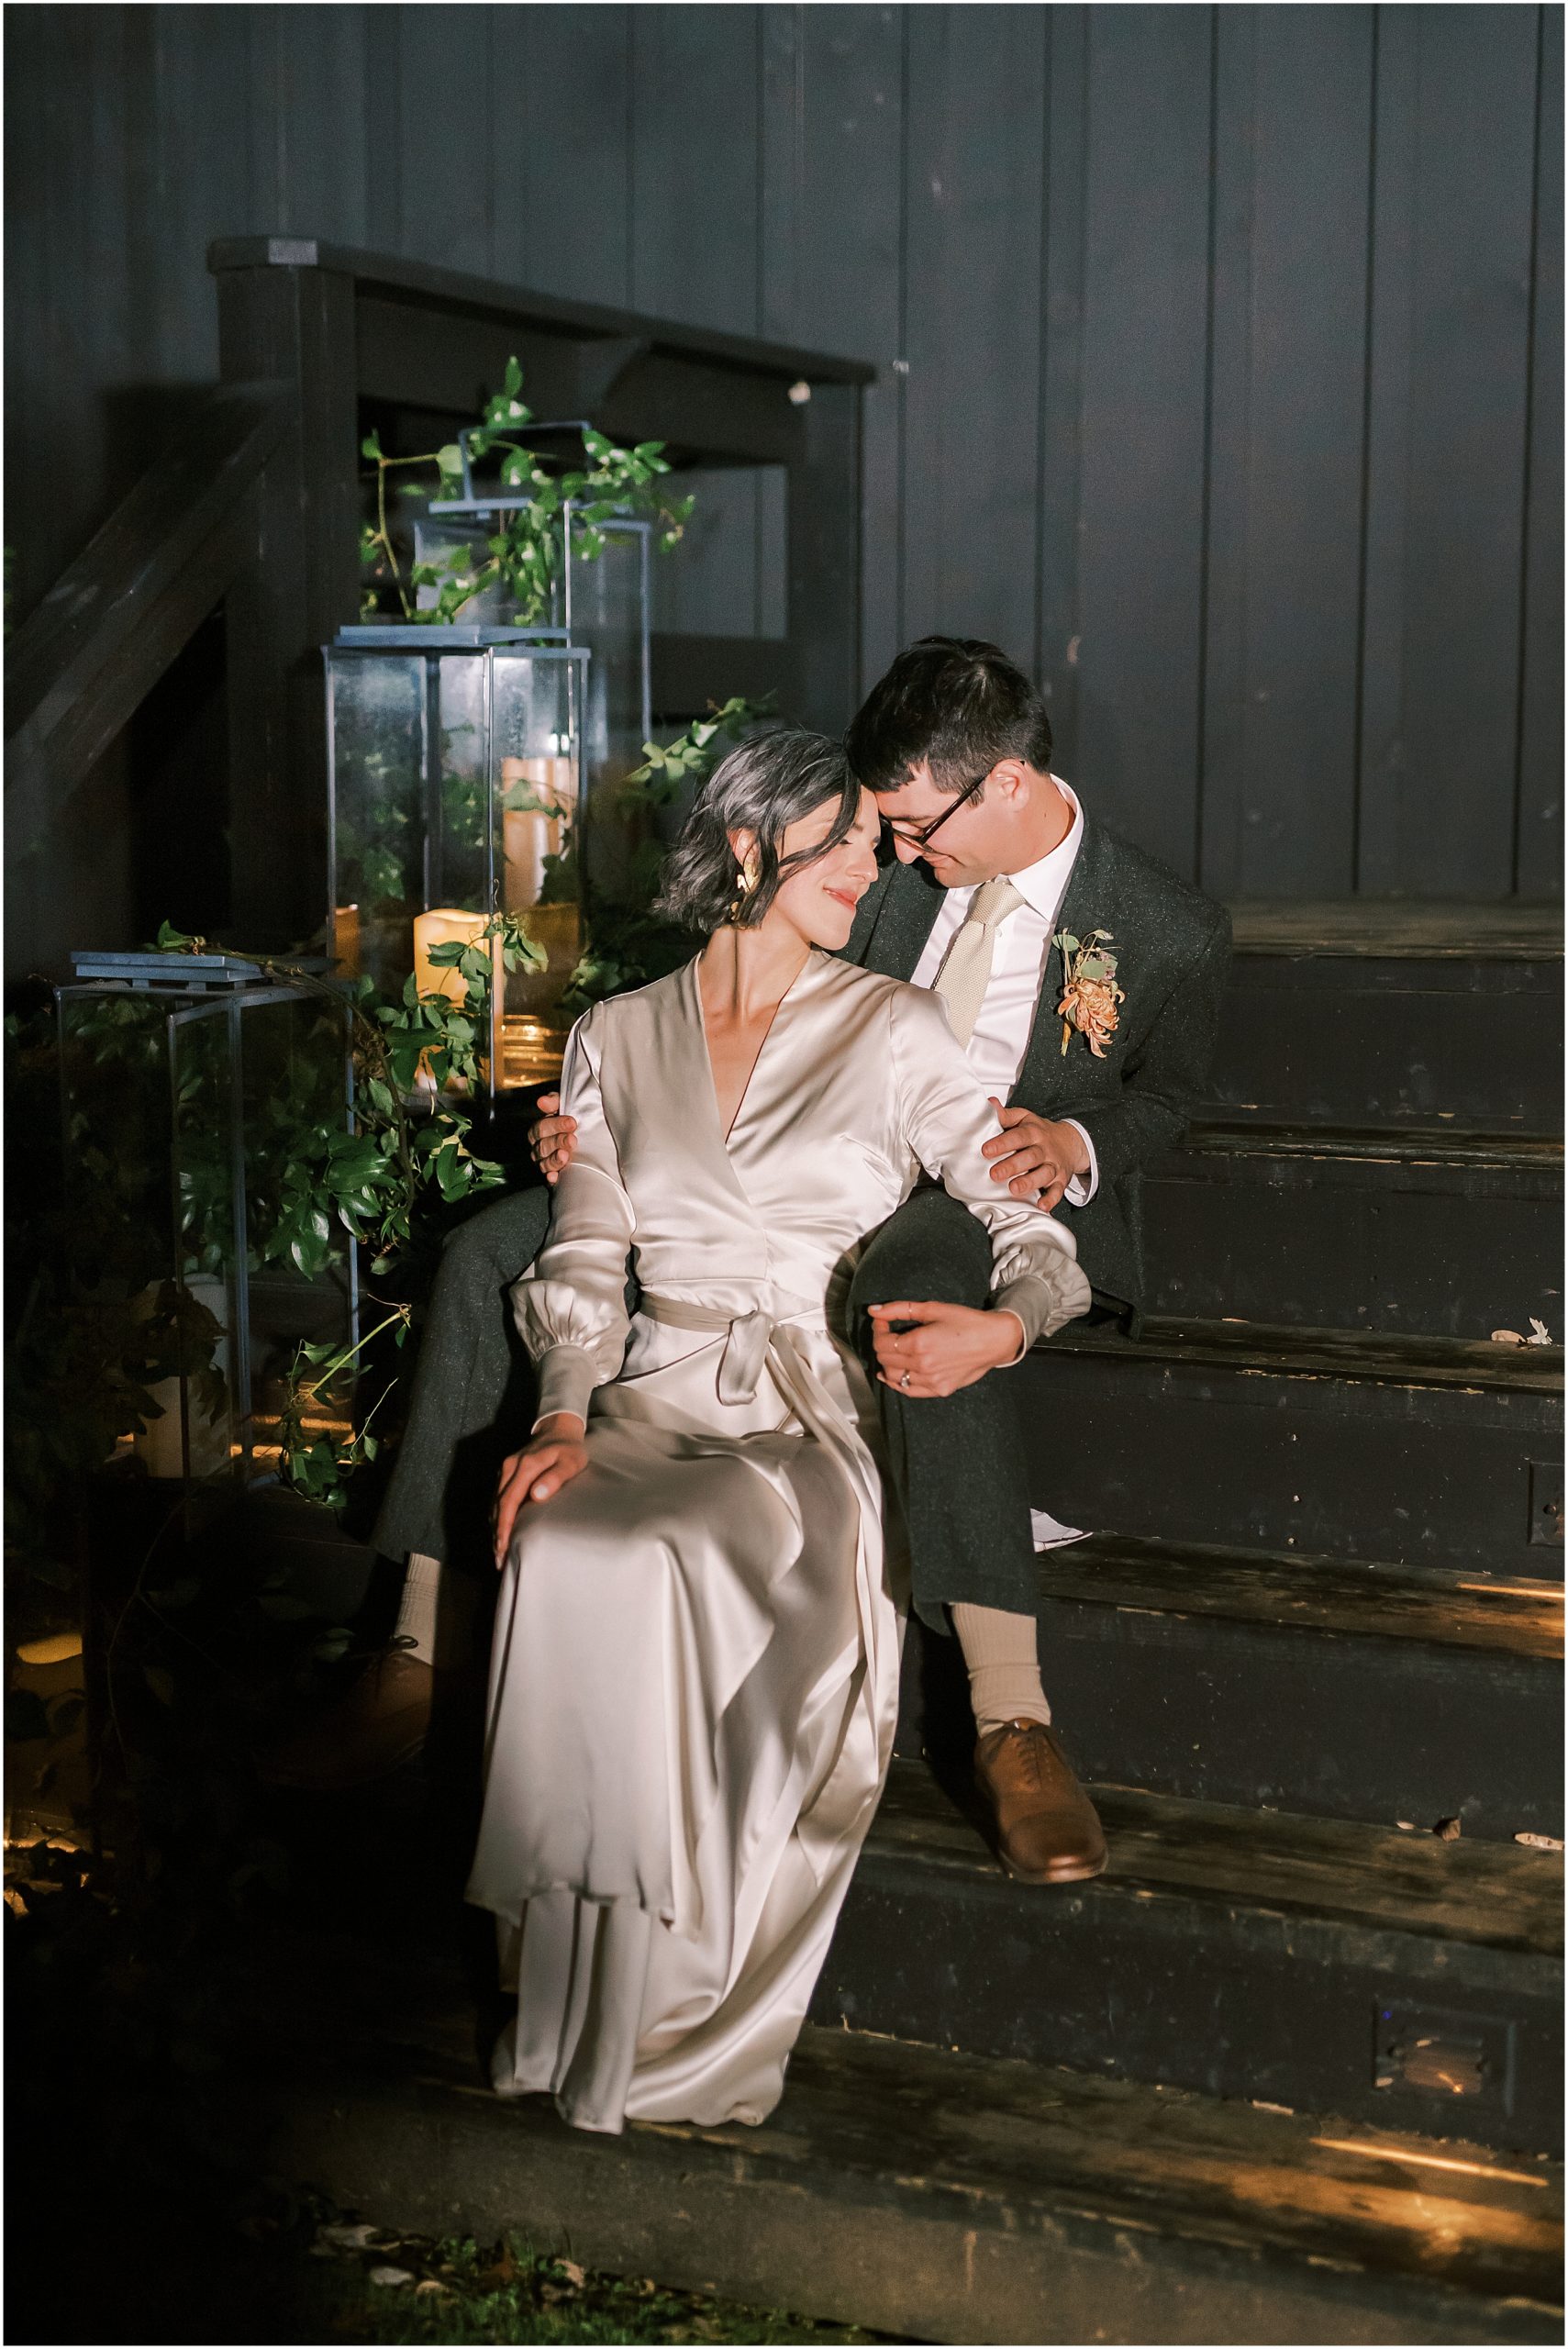 Newlyweds embracing at night during winter market themed wedding